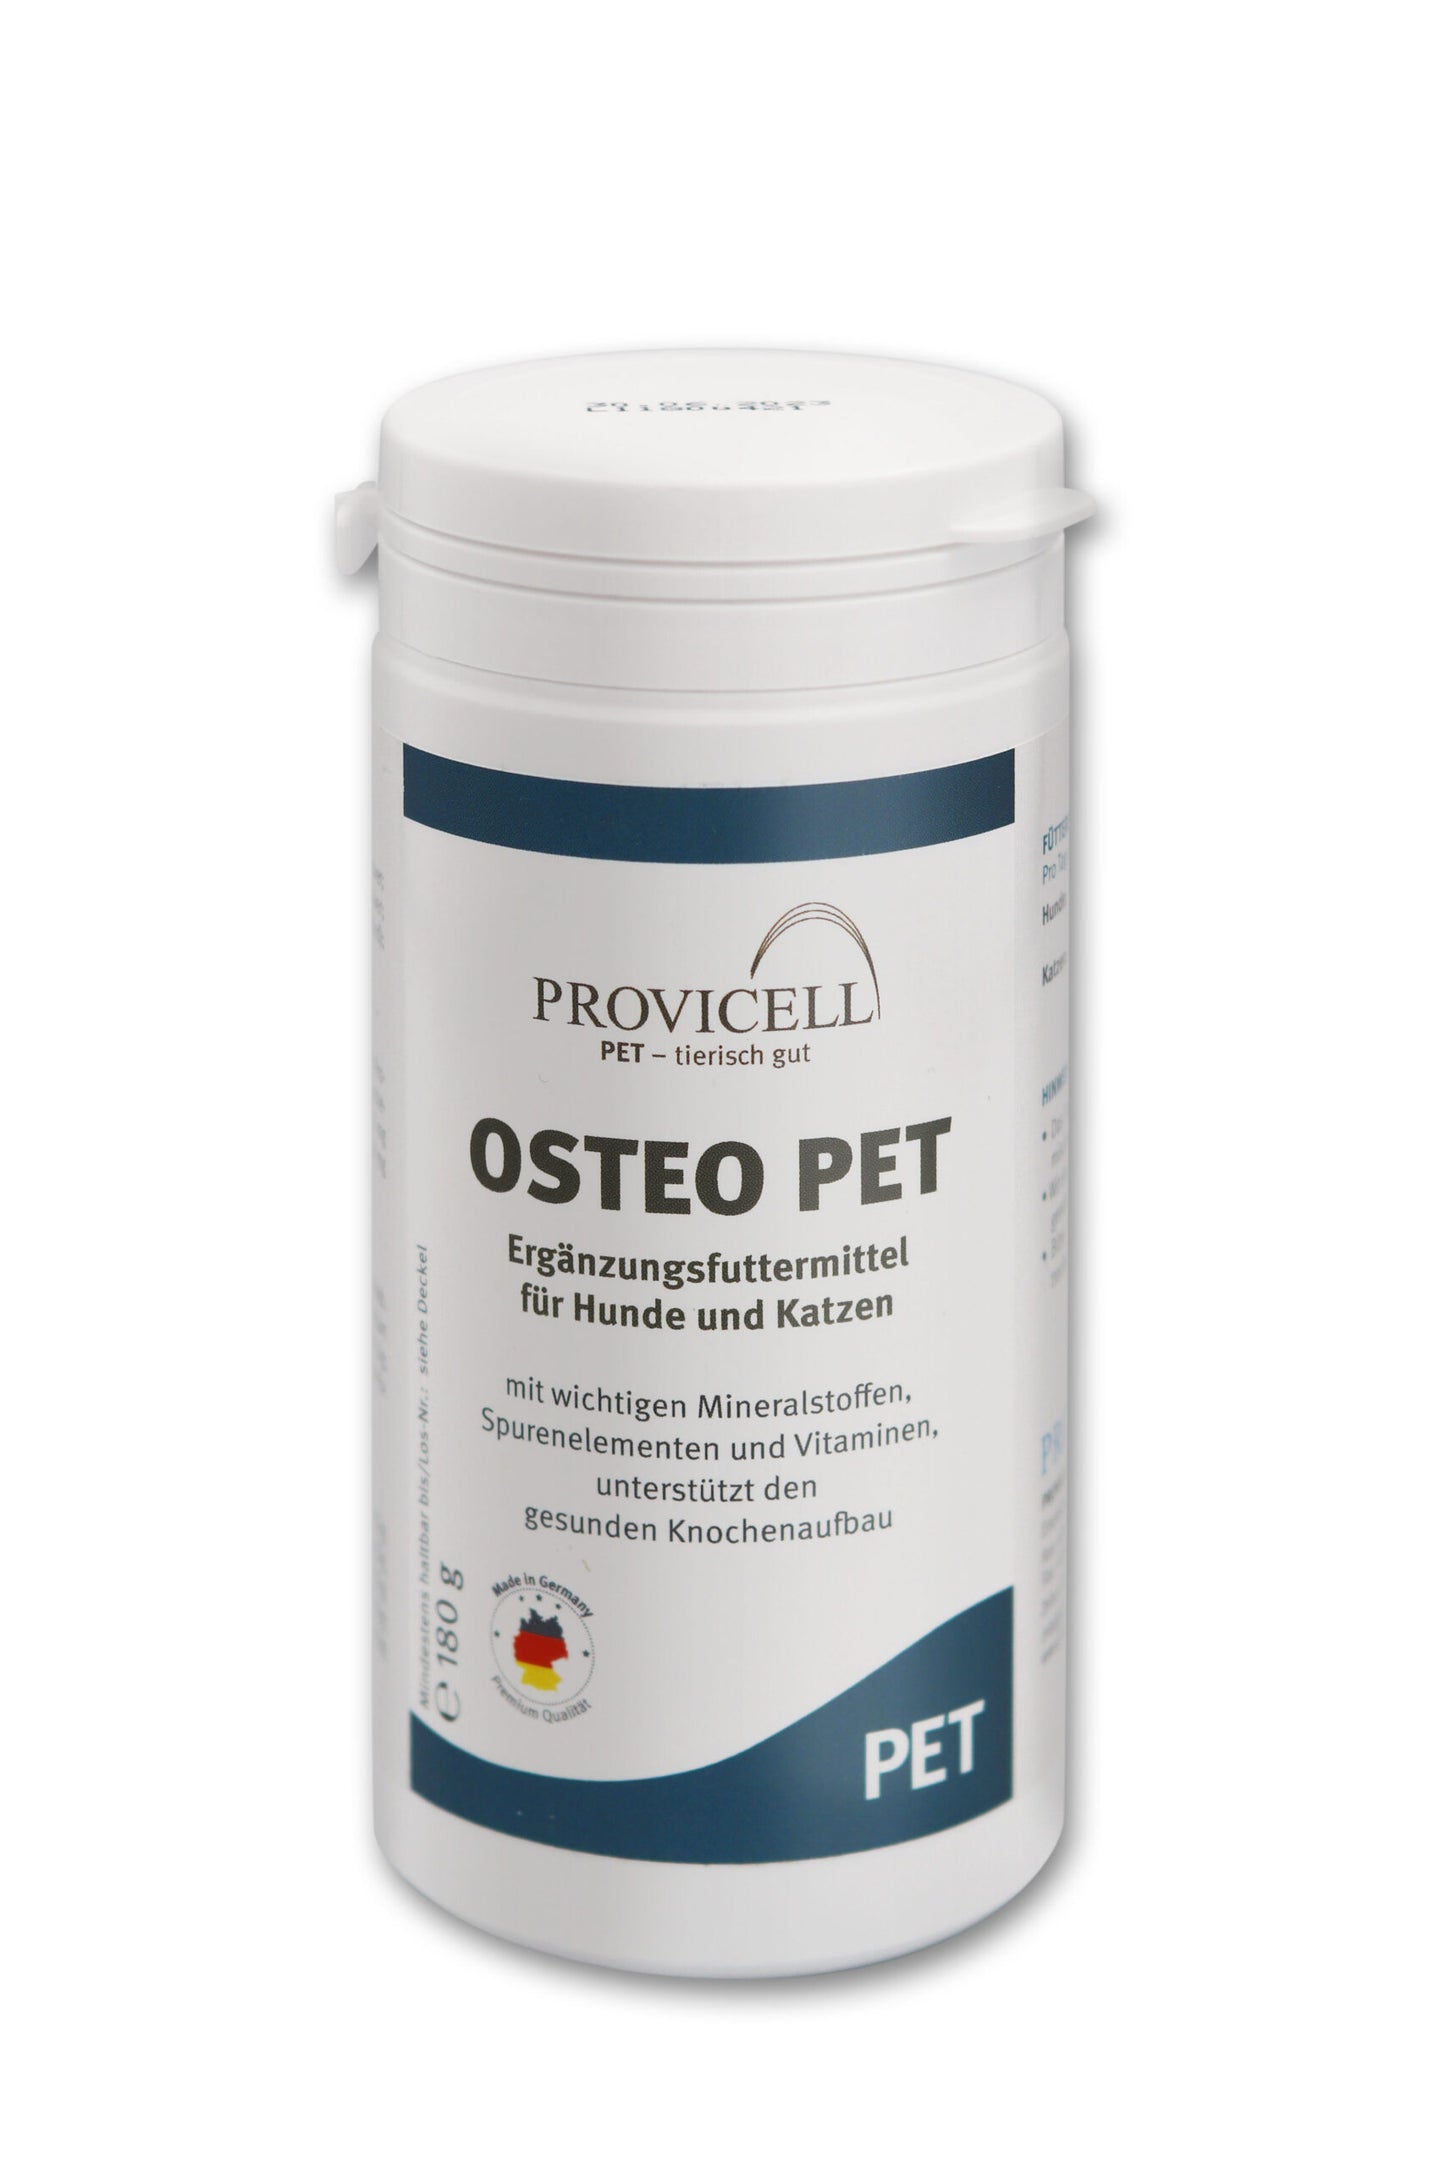 PROVICELL Osteo Pet 180g